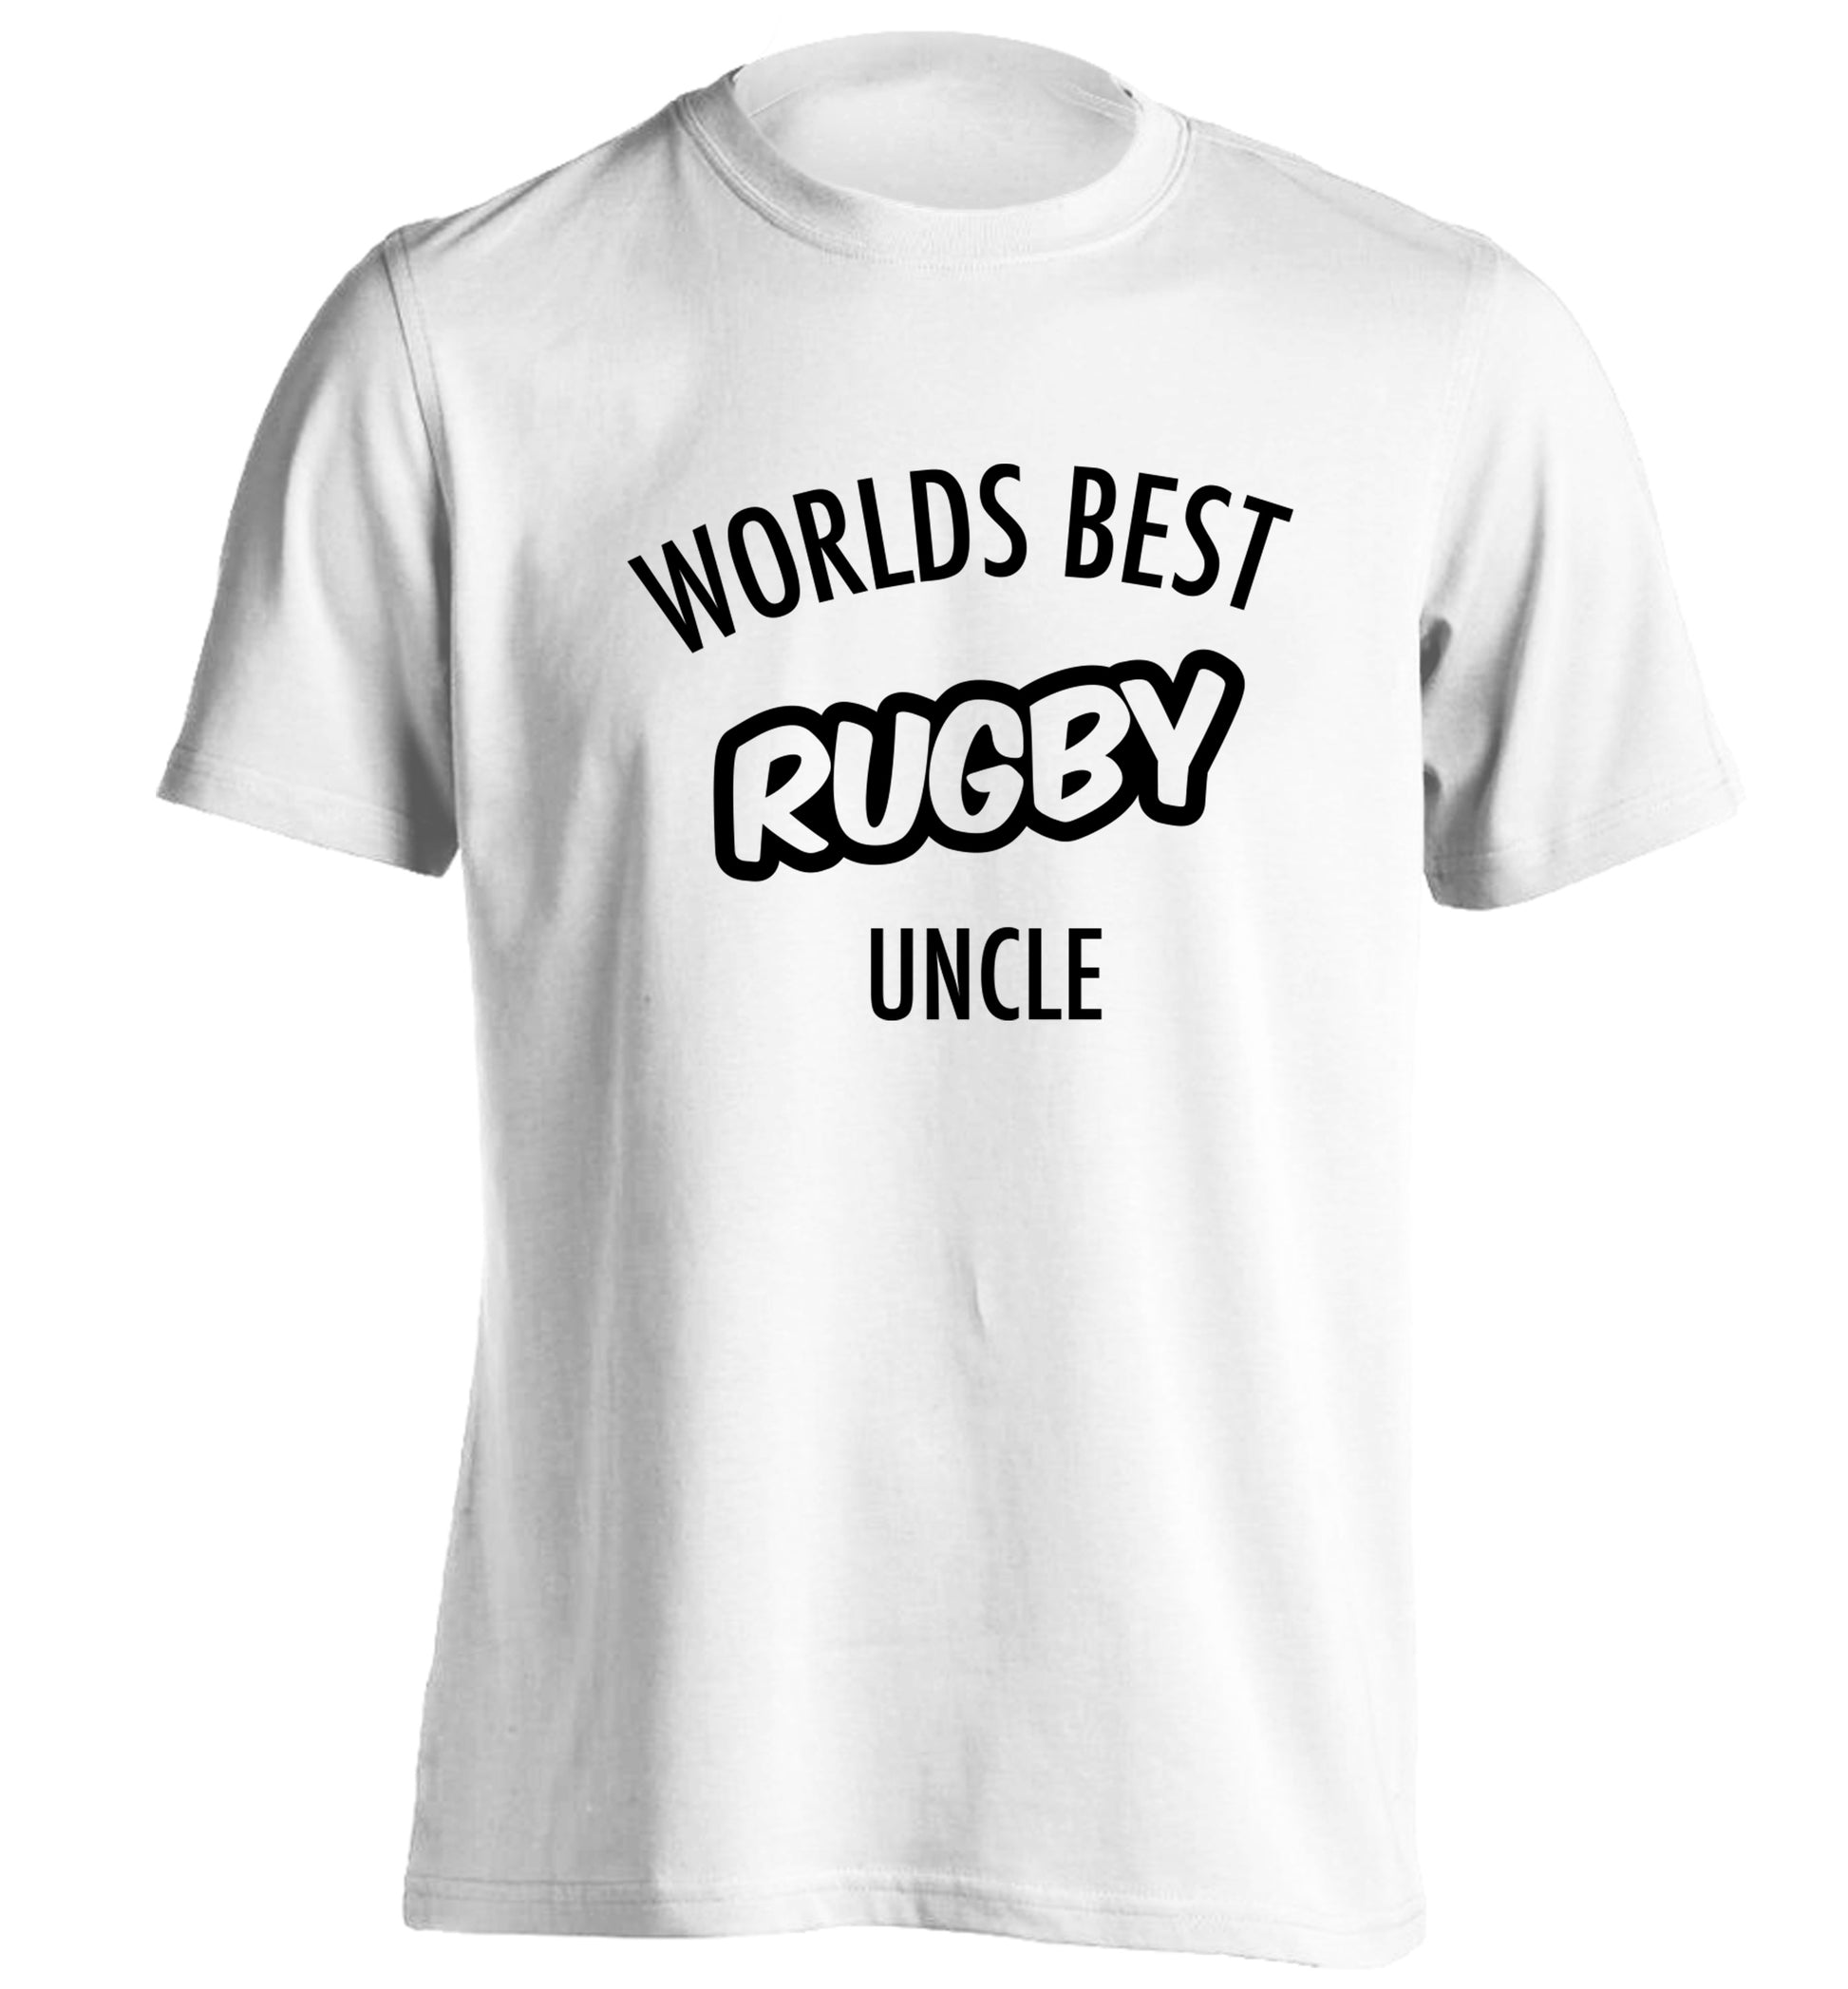 Worlds best rugby uncle adults unisex white Tshirt 2XL